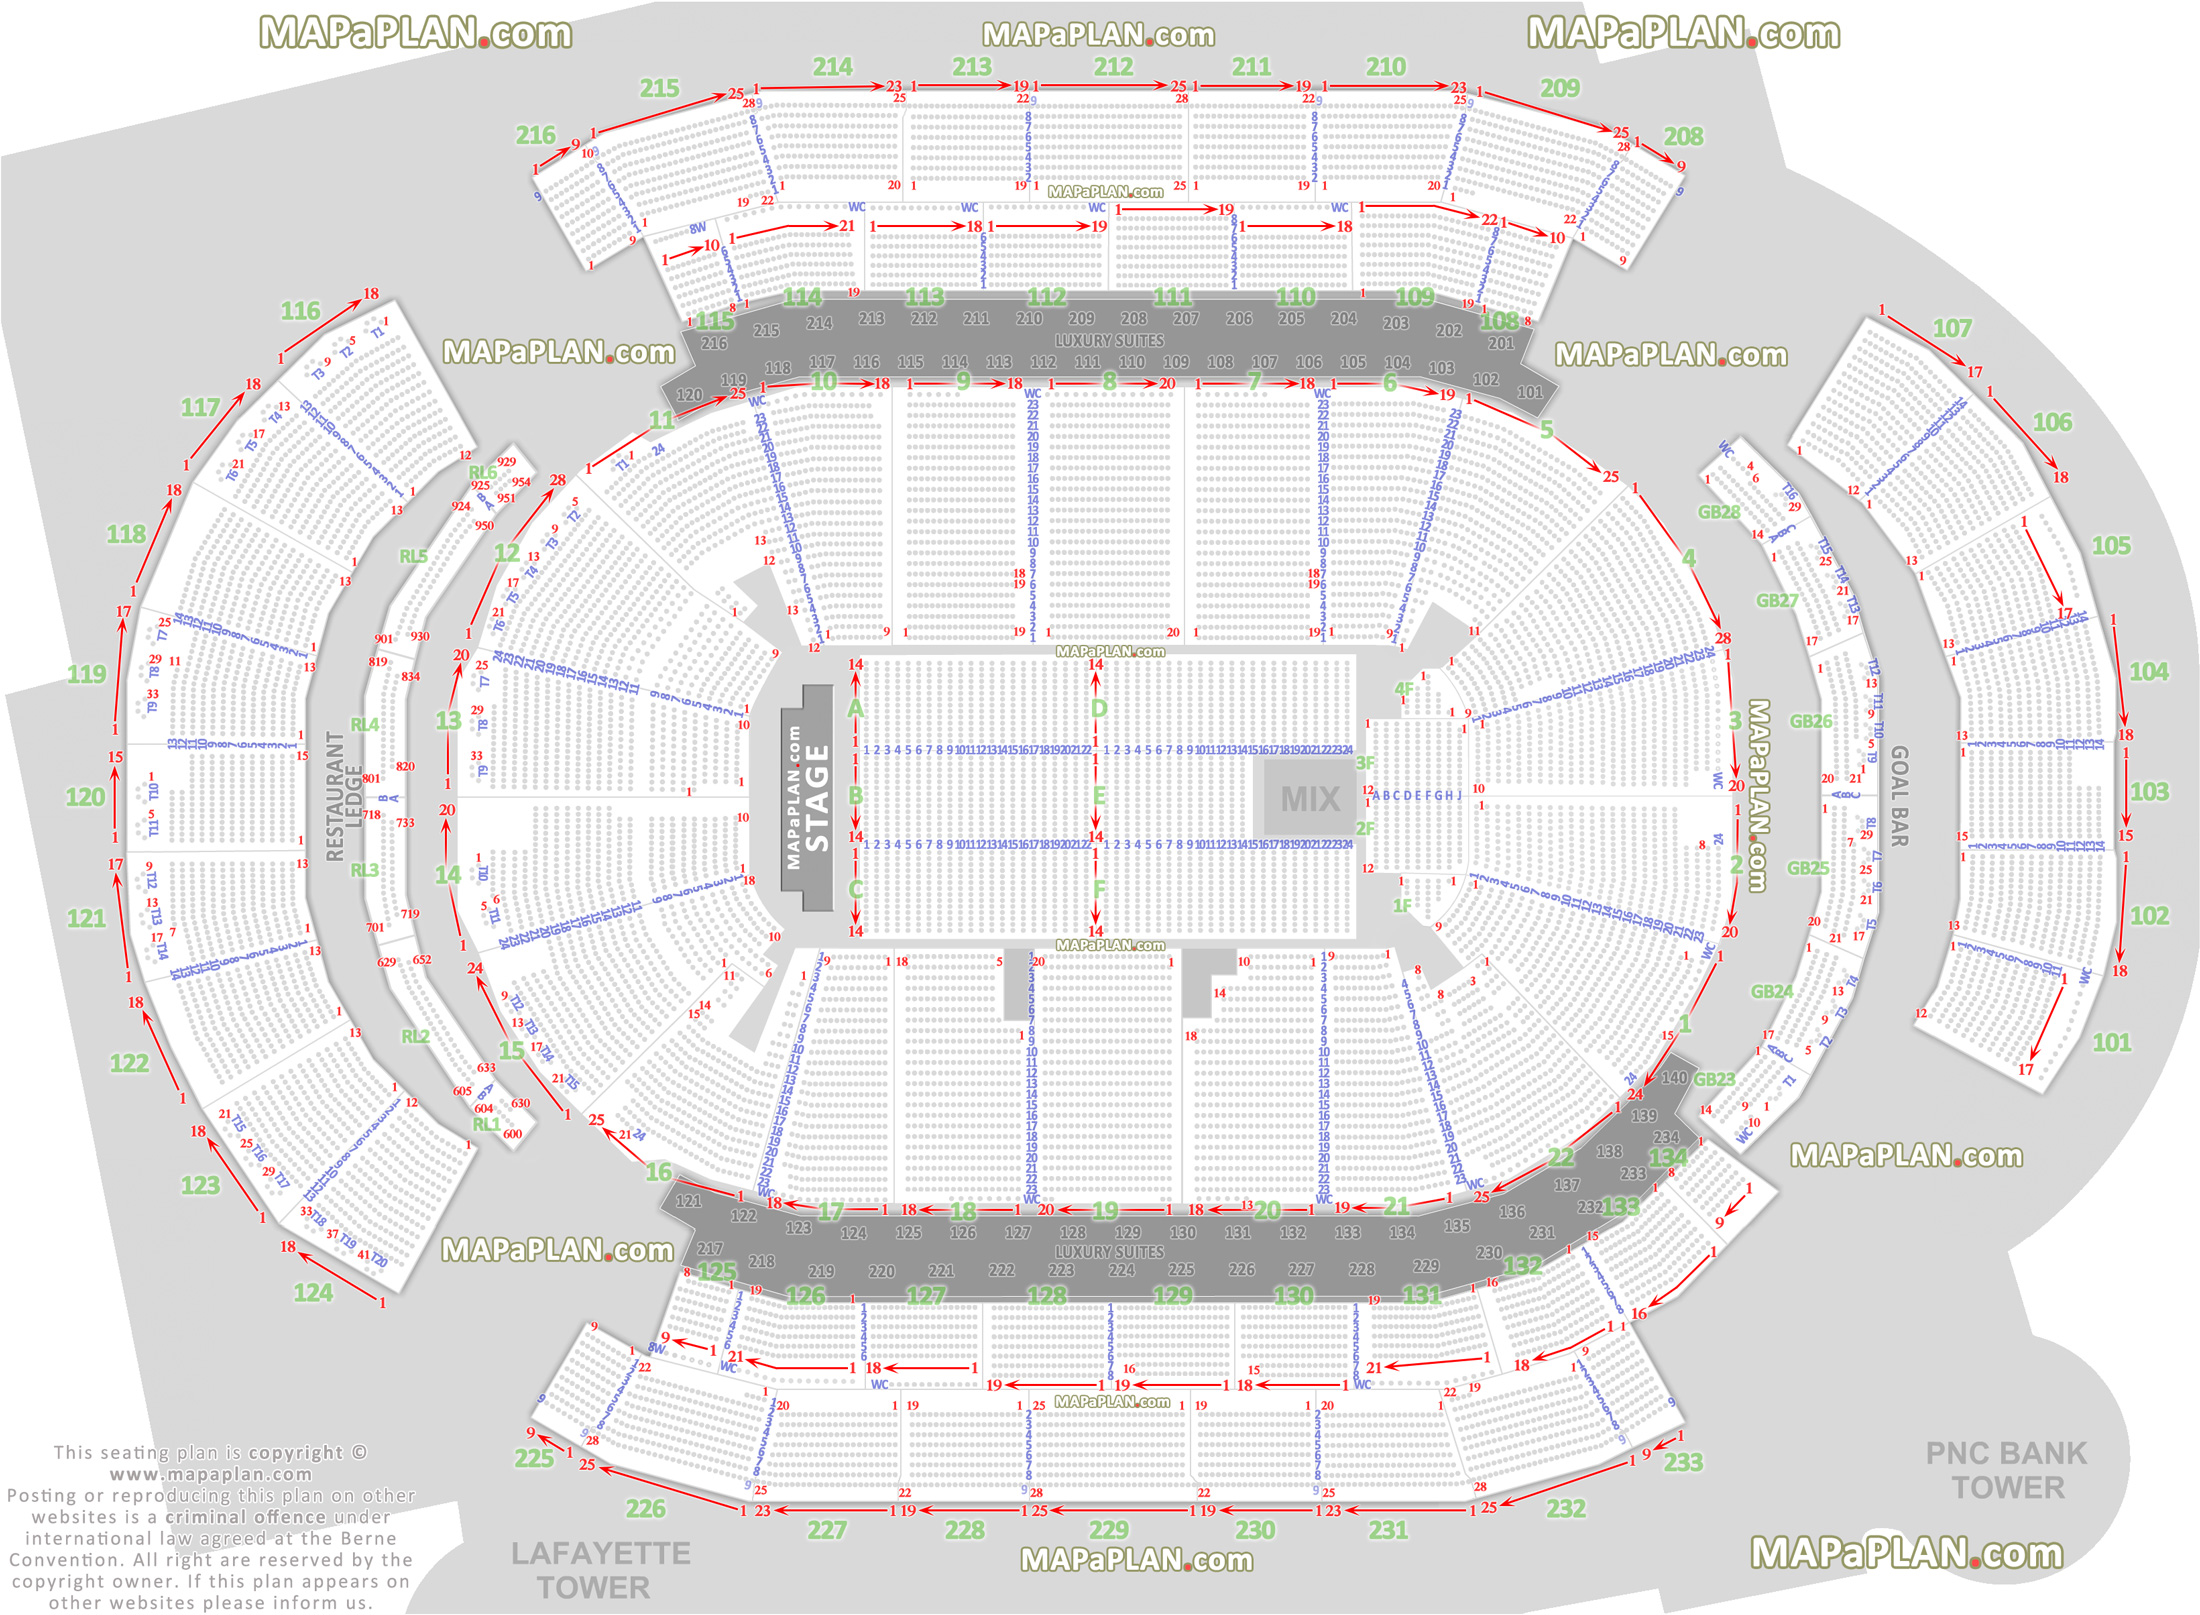 New Jersey Devils 3d Seating Chart